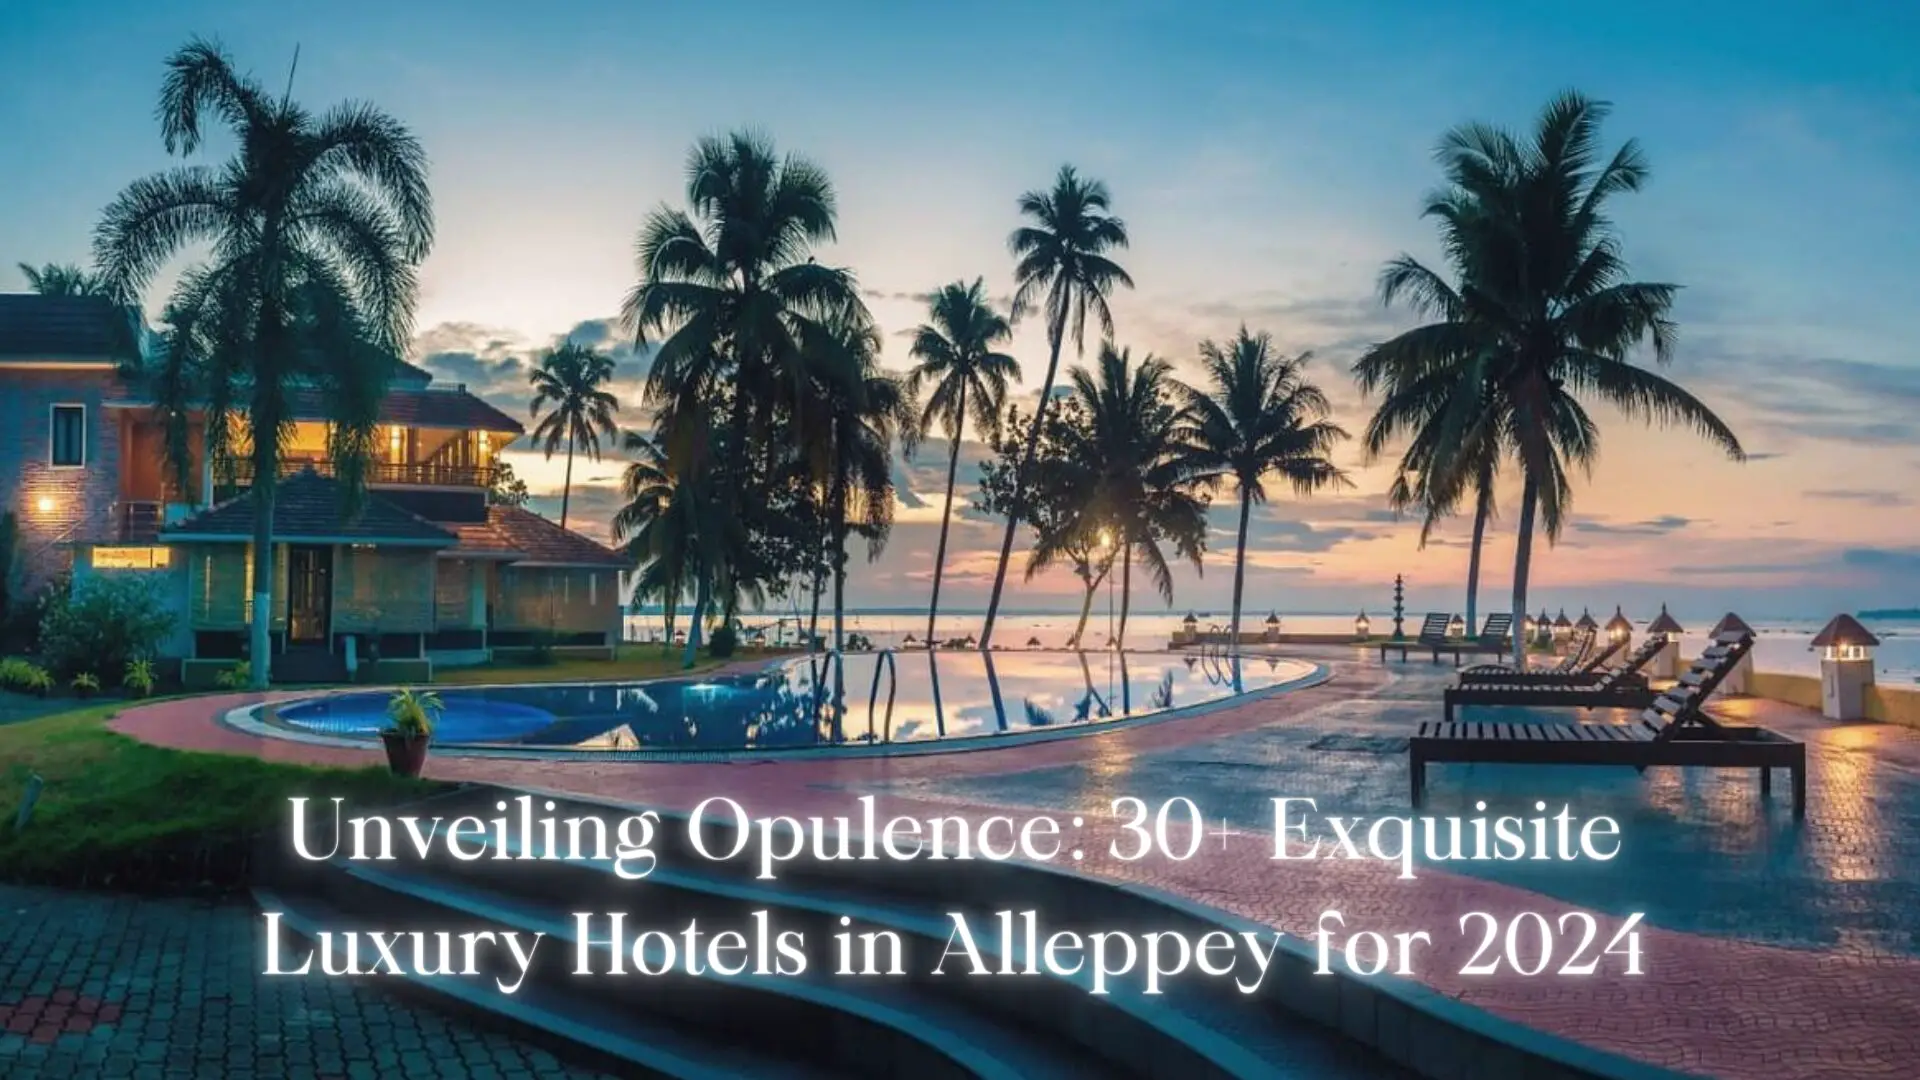 Unveiling Opulence: 30+ Exquisite Luxury Hotels in Alleppey for 2024